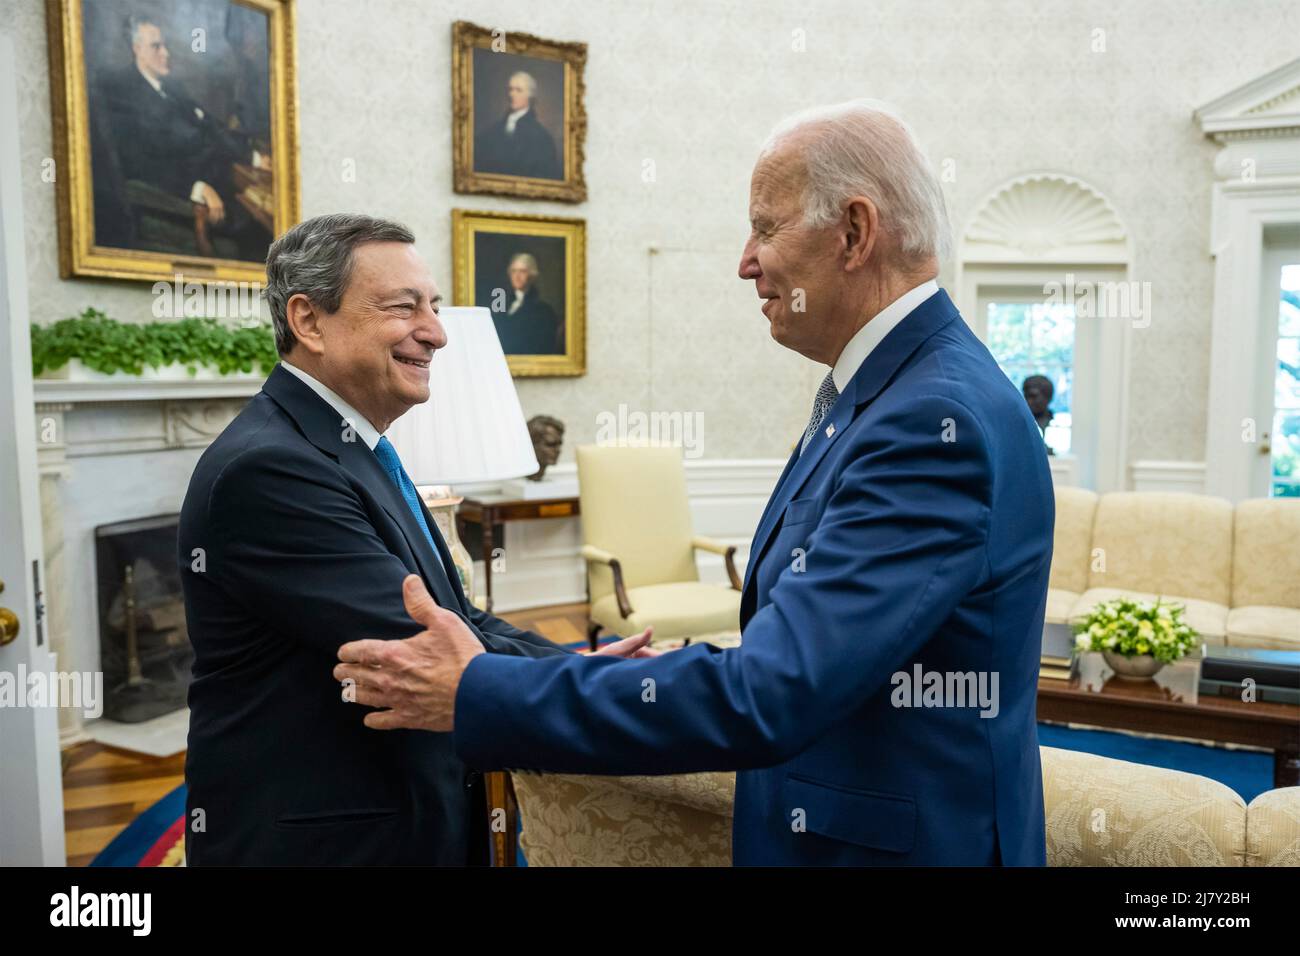 Washington, United States Of America. 10th May, 2022. Washington, United States of America. 10 May, 2022. U.S President Joe Biden, welcomes Italian Prime Minister Mario Draghi, to the Oval Office of the White House, May 10, 2022 in Washington, DC Credit: Adam Schultz/White House Photo/Alamy Live News Stock Photo